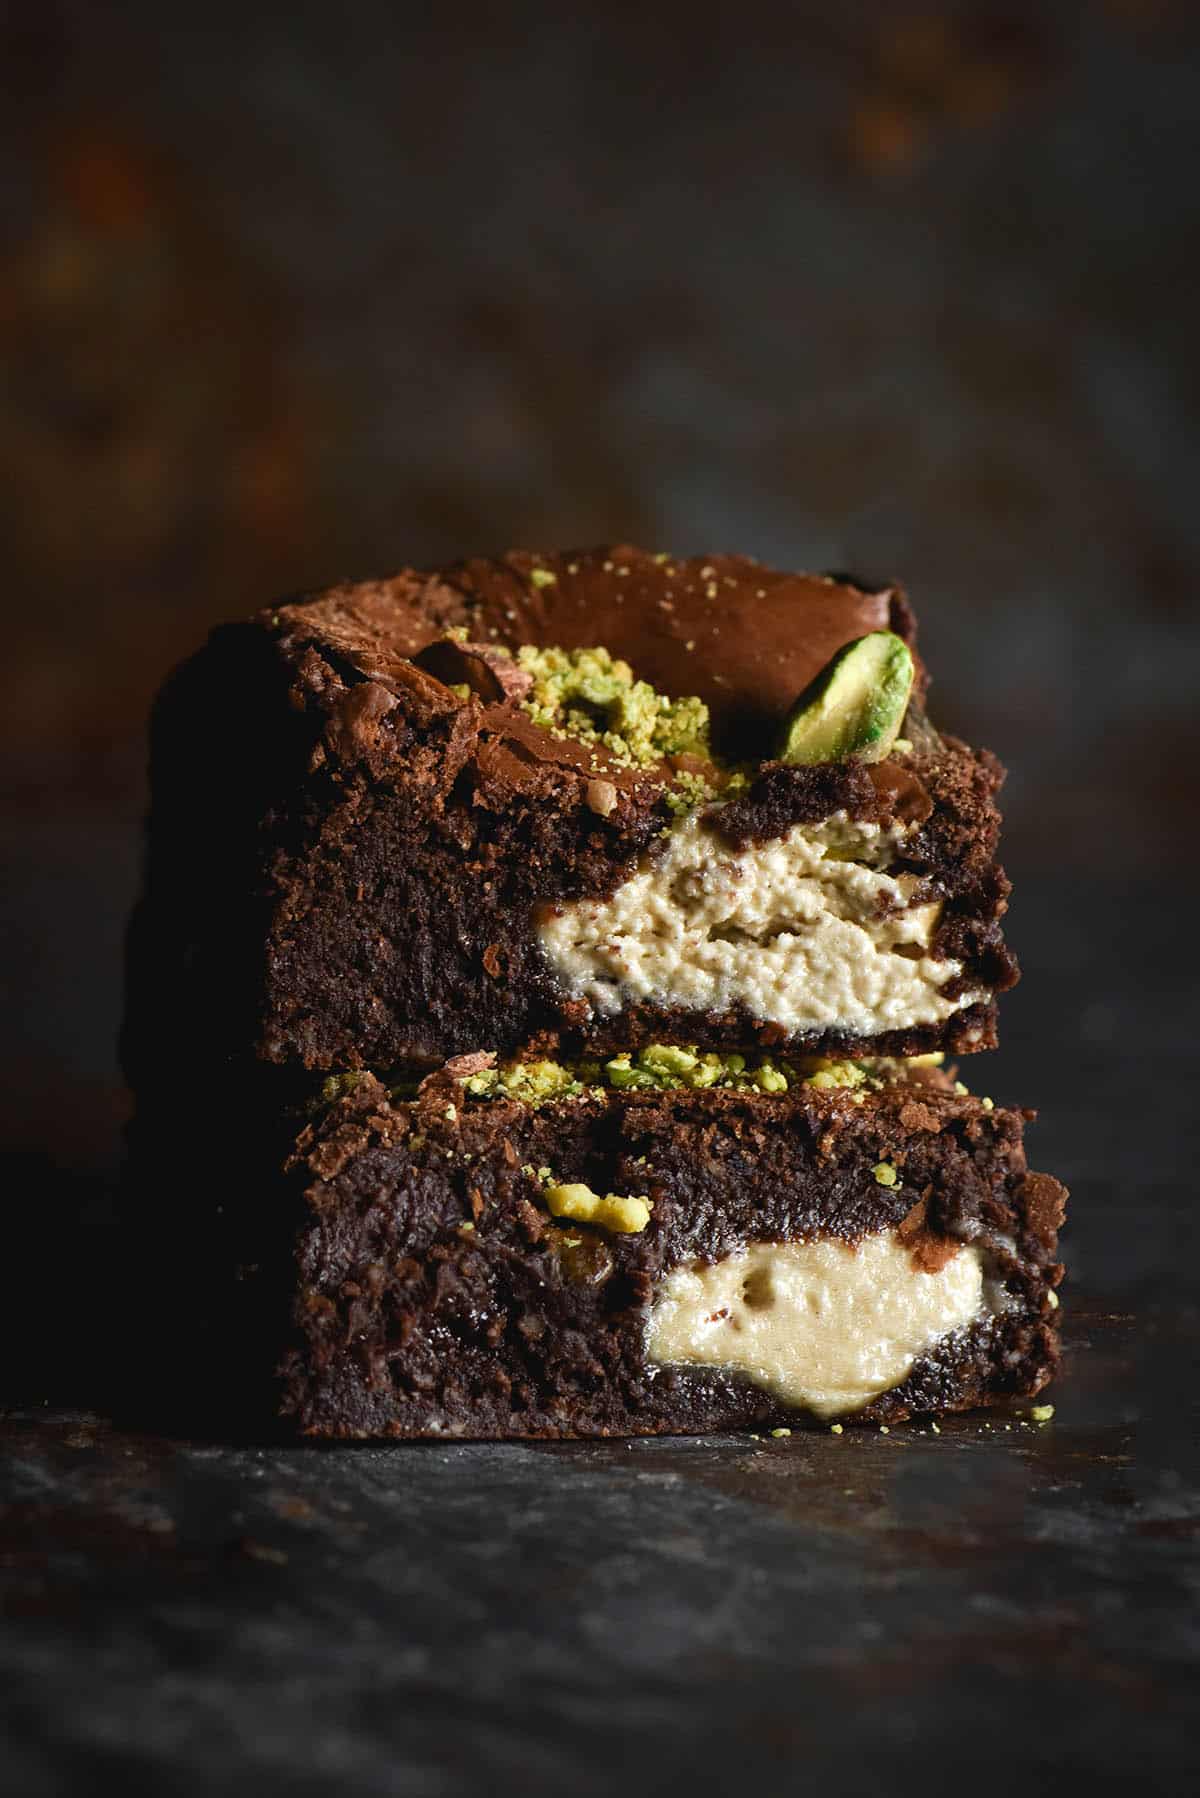 A side on view of a stack of two gluten free brownie squares that are filled with halva and pistachios. Large chunks of halva are visible in the brownie sides, as are chunks of browned and fresh, bright green pistachios. The brownies sit atop a dark blue metal surface and in front of a dark grey rusted backdrop